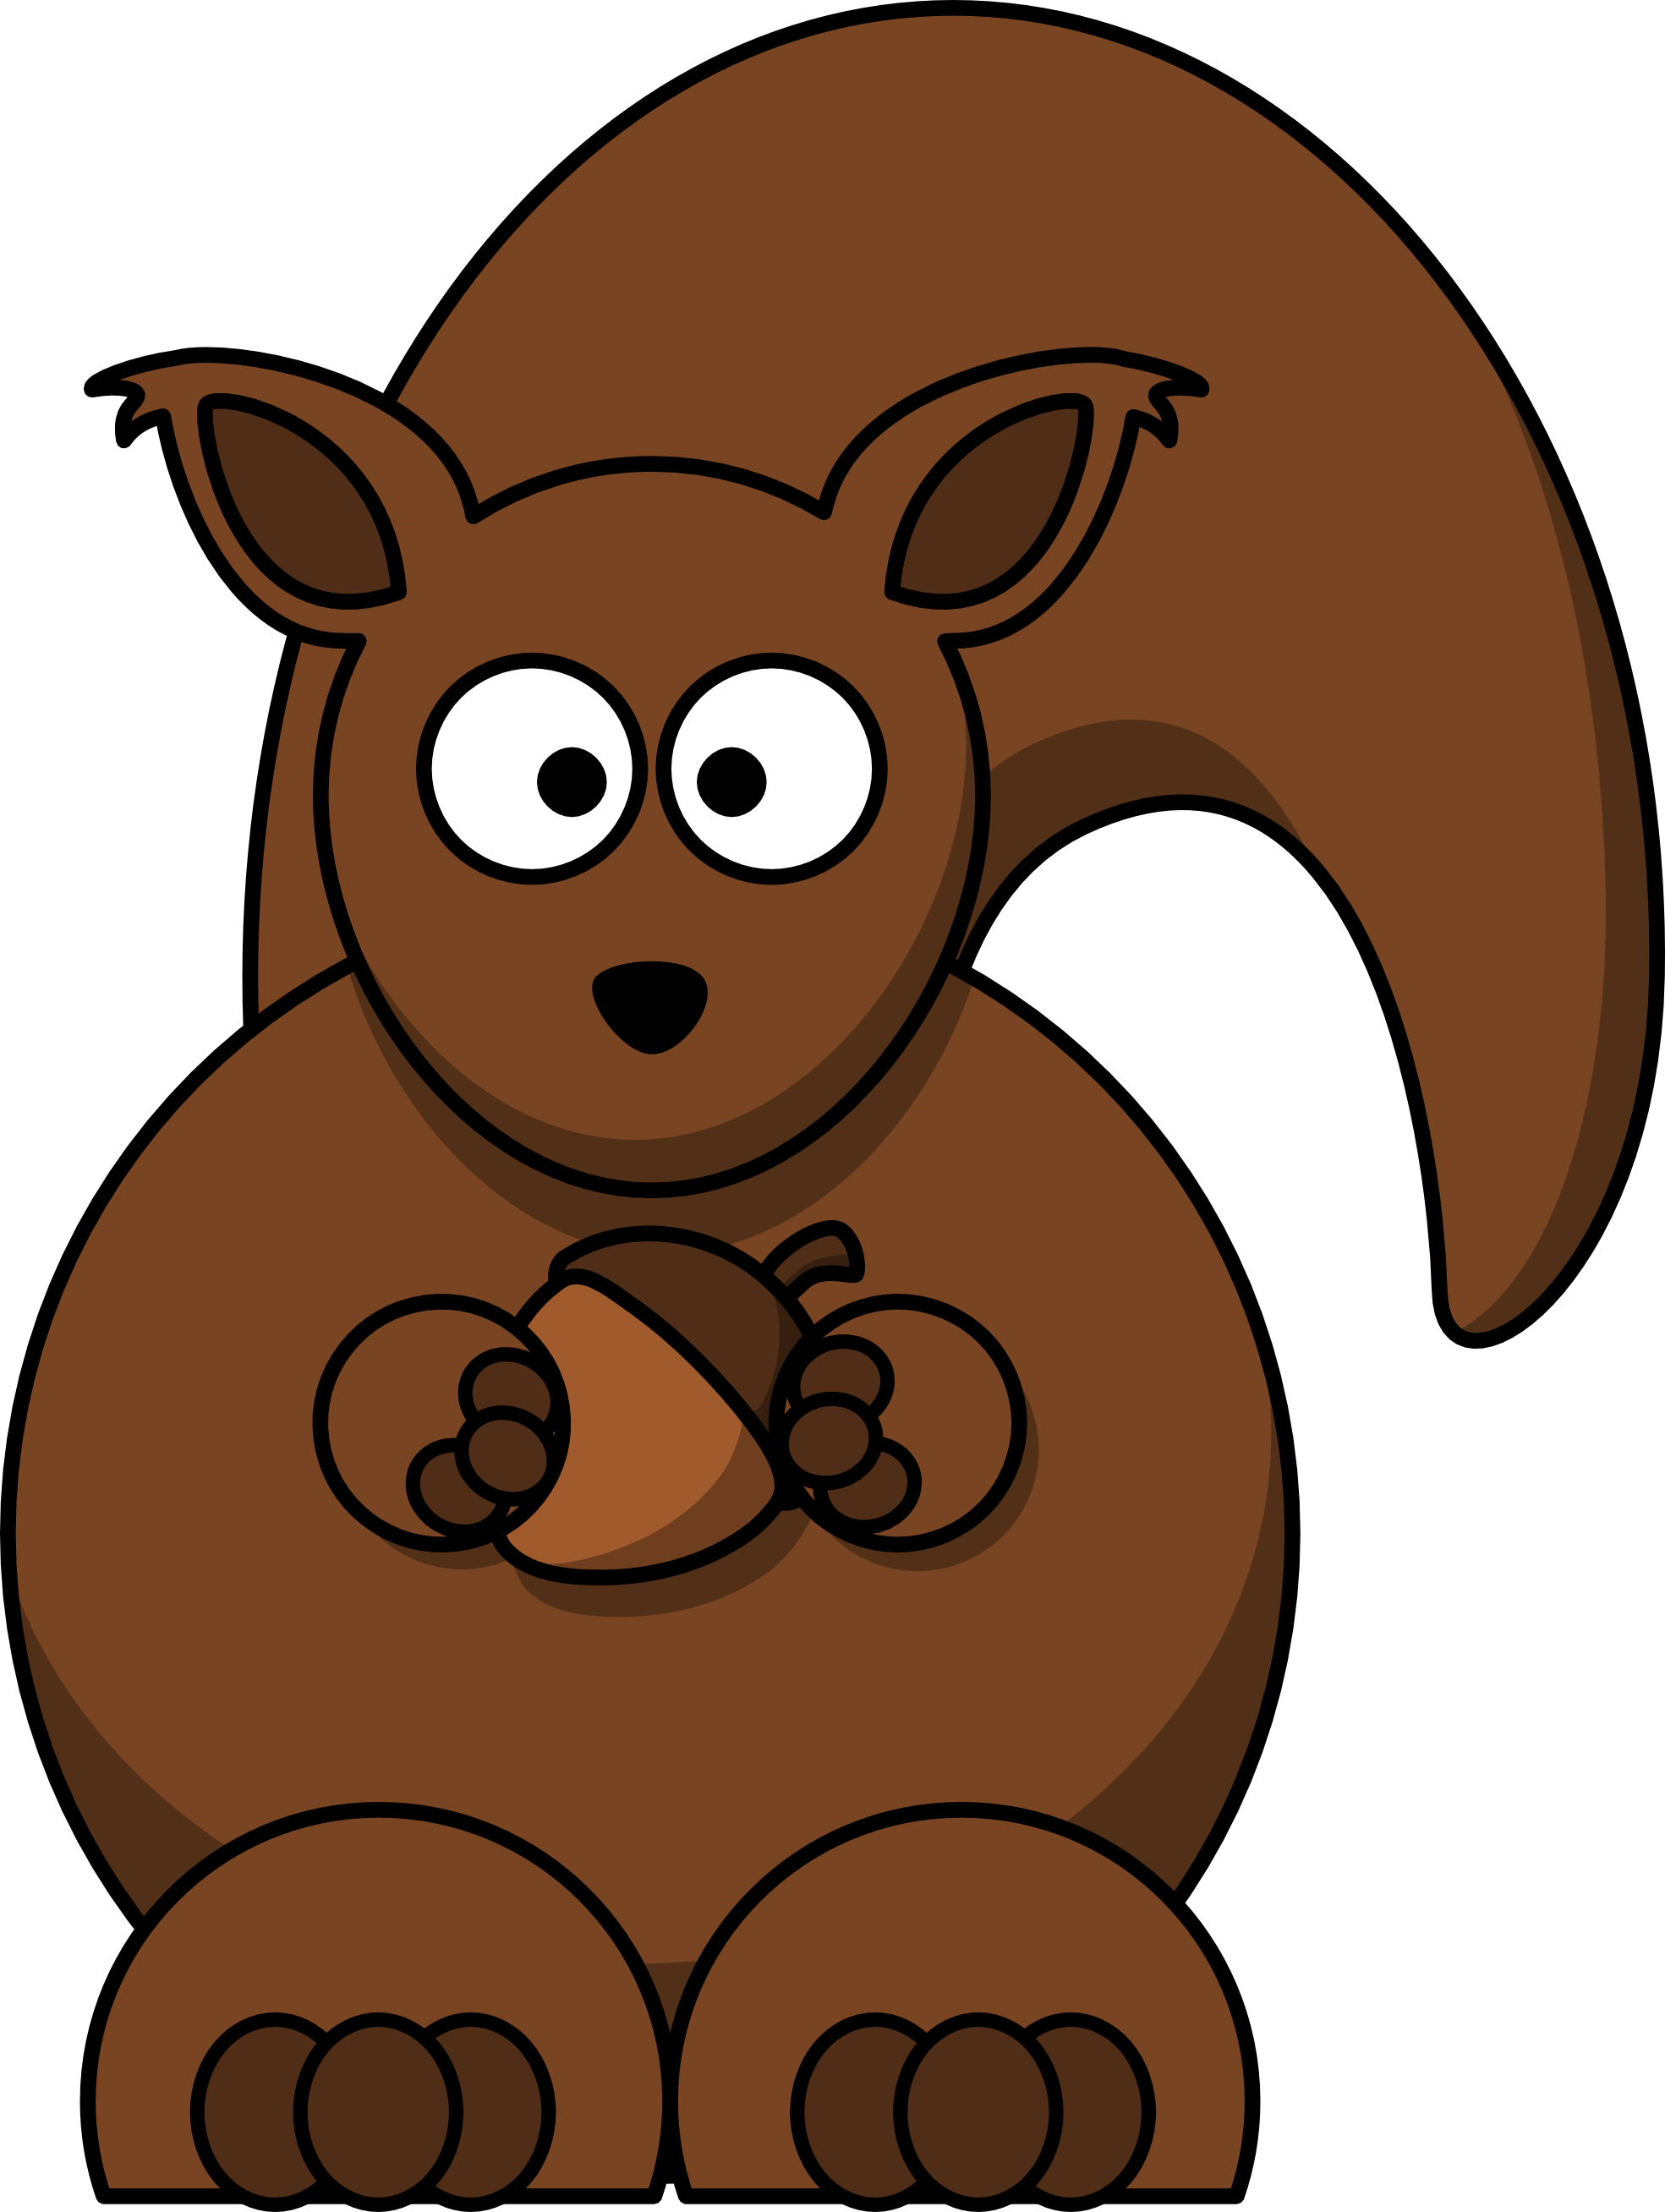 lemmling cartoon squirrel | Clipart library - Free Clipart Images